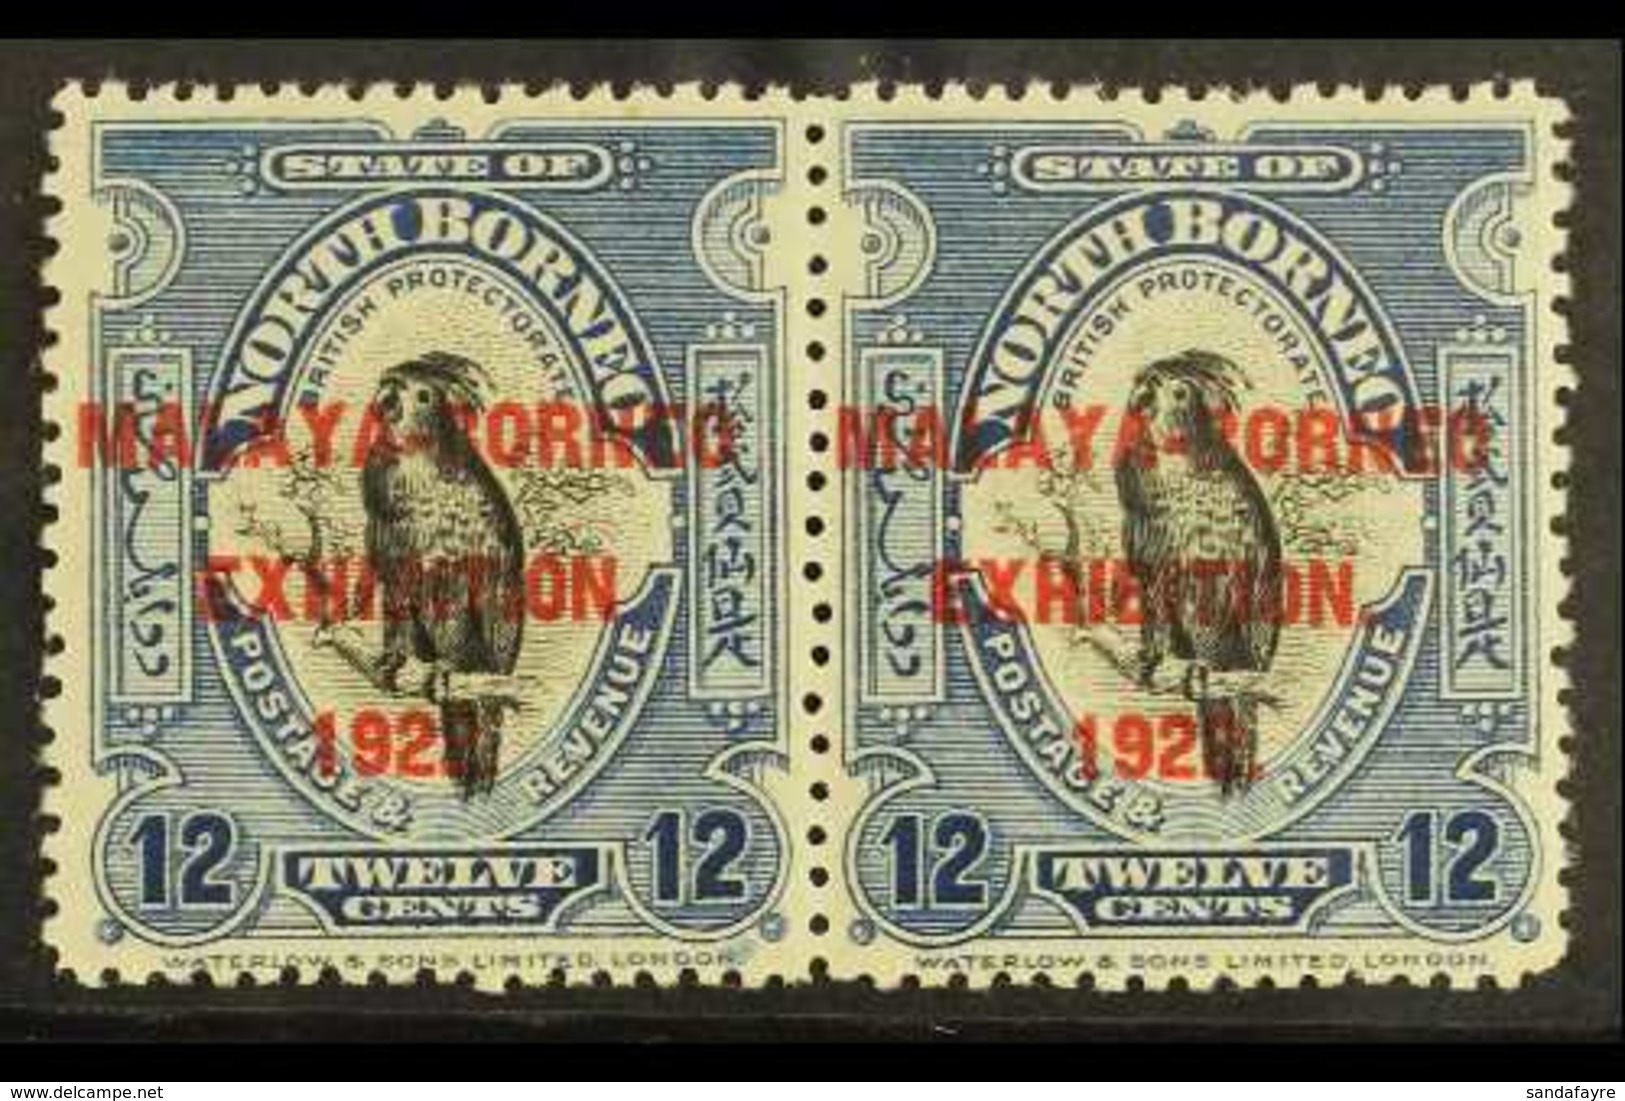 1922 12c Deep Blue Pair, One Stamp Bearing Variety "Stop After Exhibition", SG 265/265a, Fine Mint (2 Stamps) For More I - Noord Borneo (...-1963)